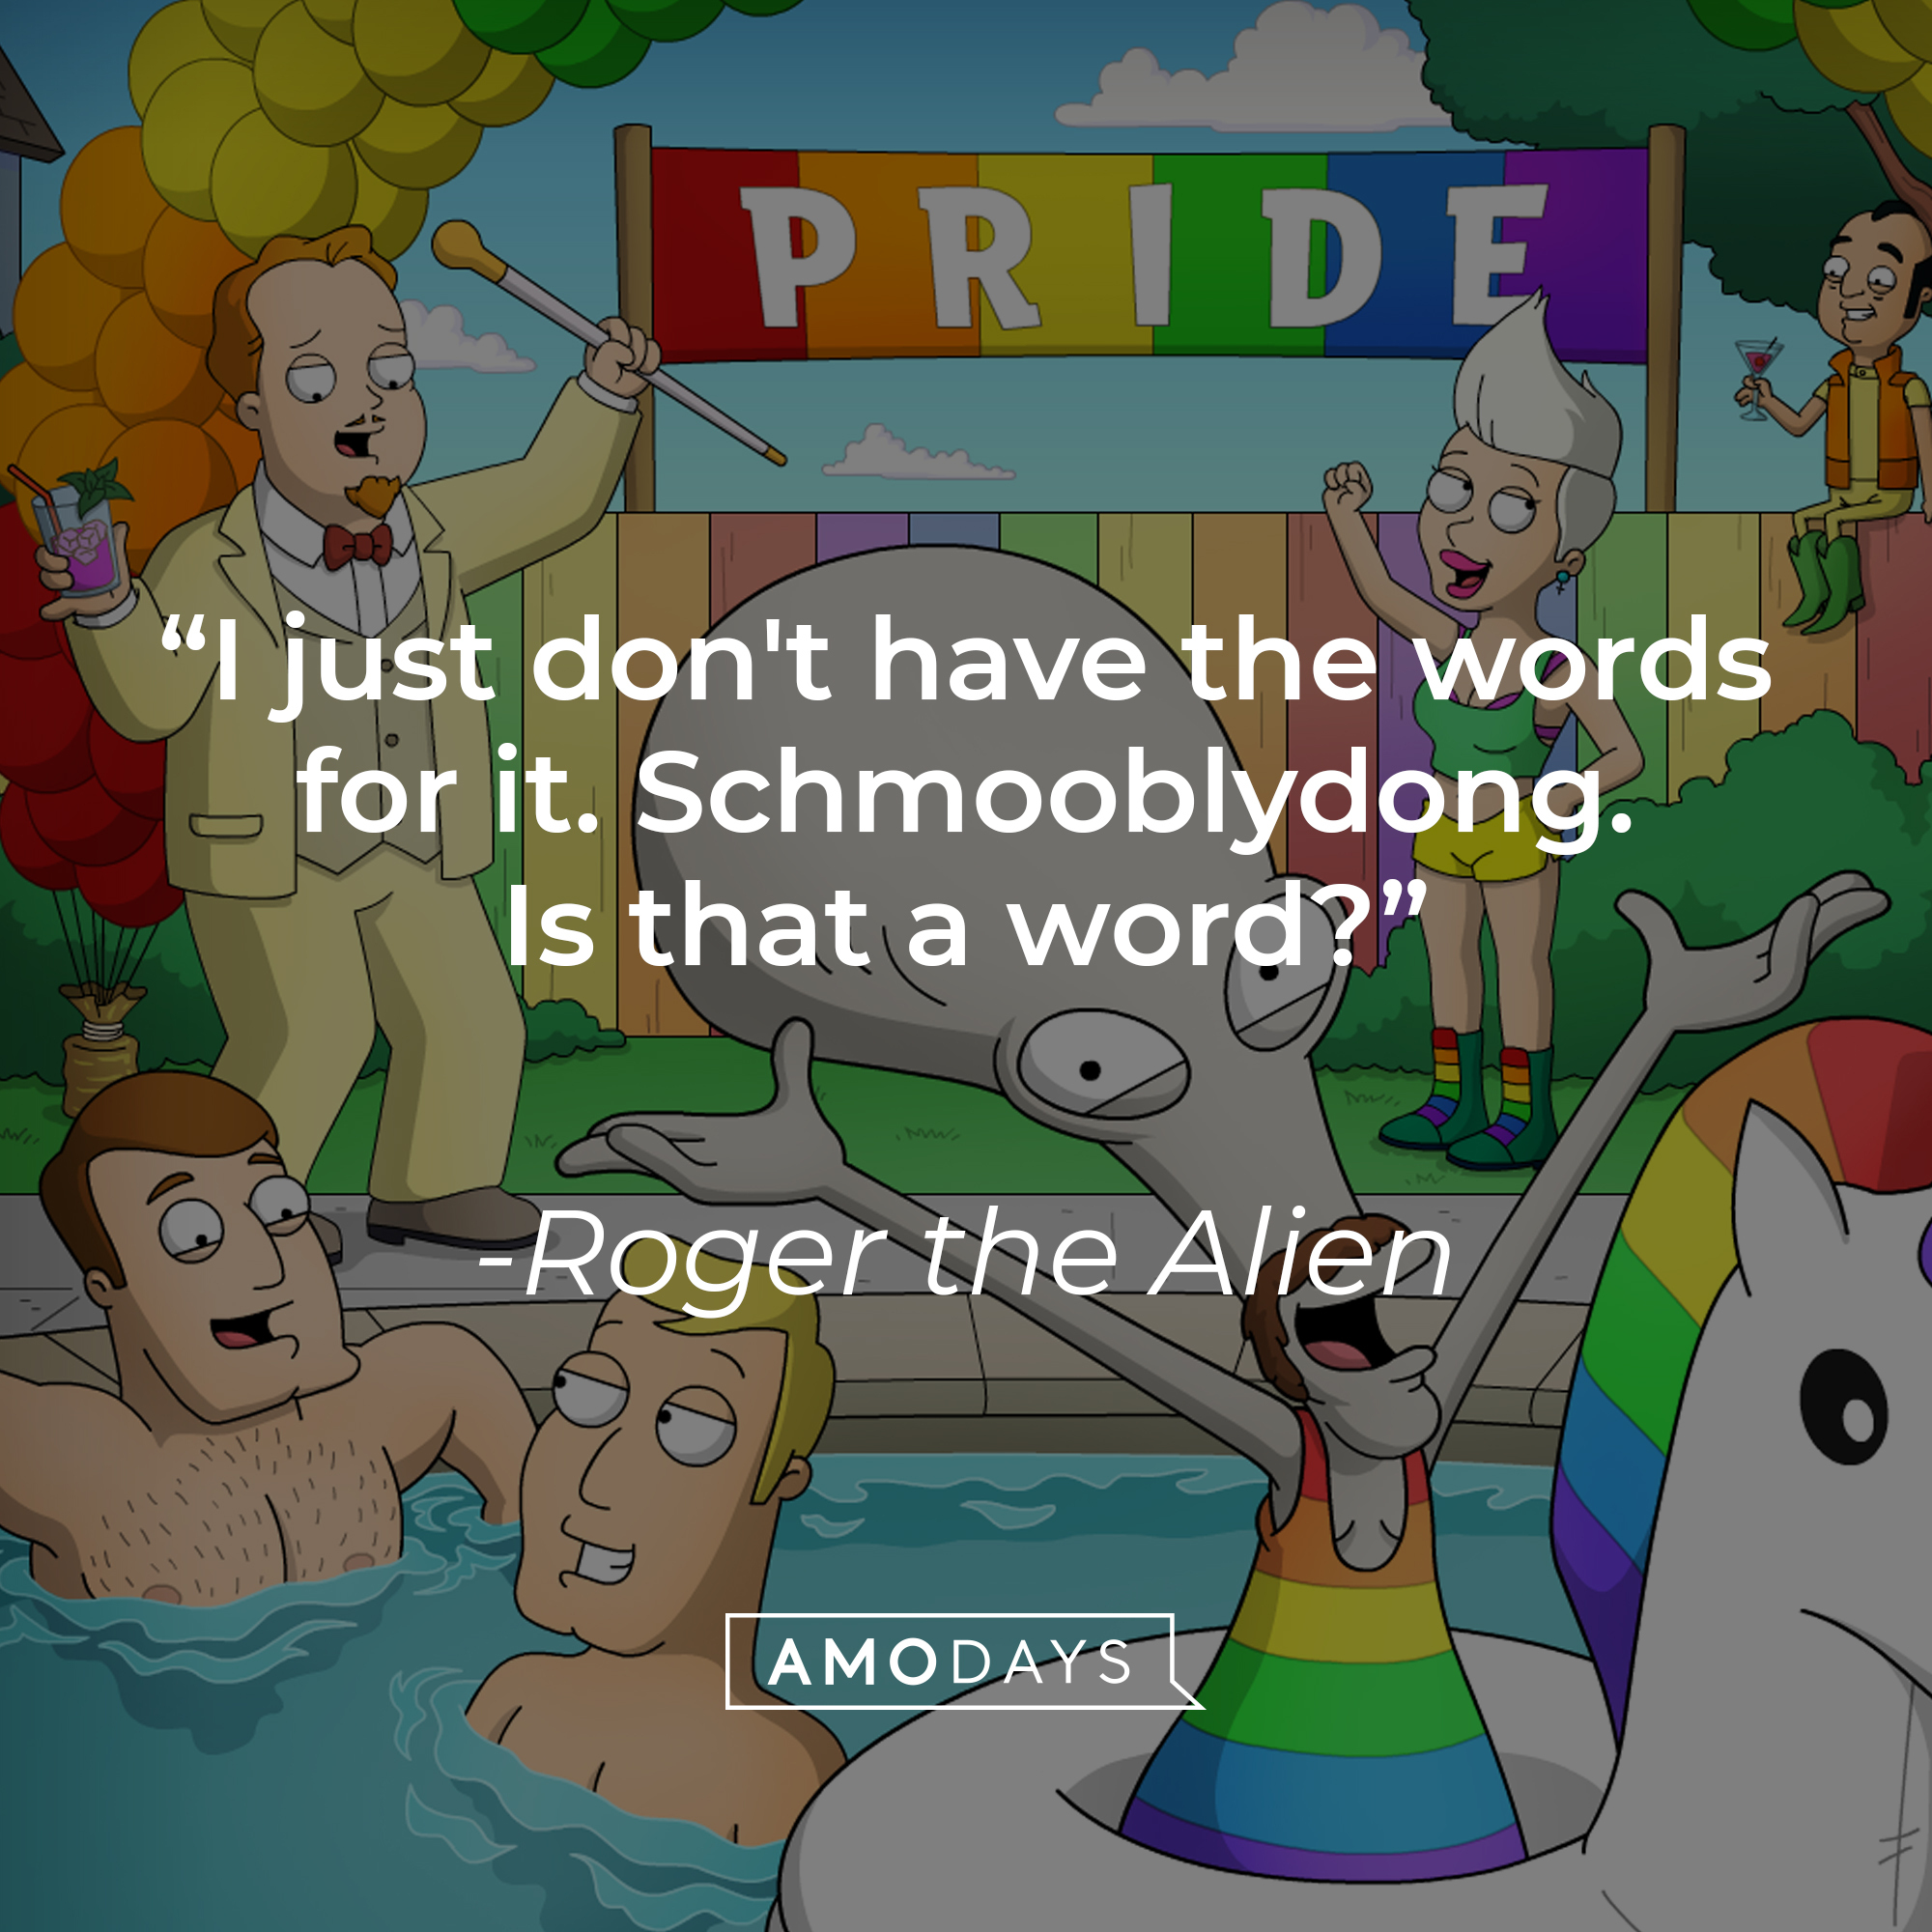 Roger the Alien with his quote:“I just don't have the words for it. Schmooblydong. Is that a word?” | Source: facebook.com/AmericanDad